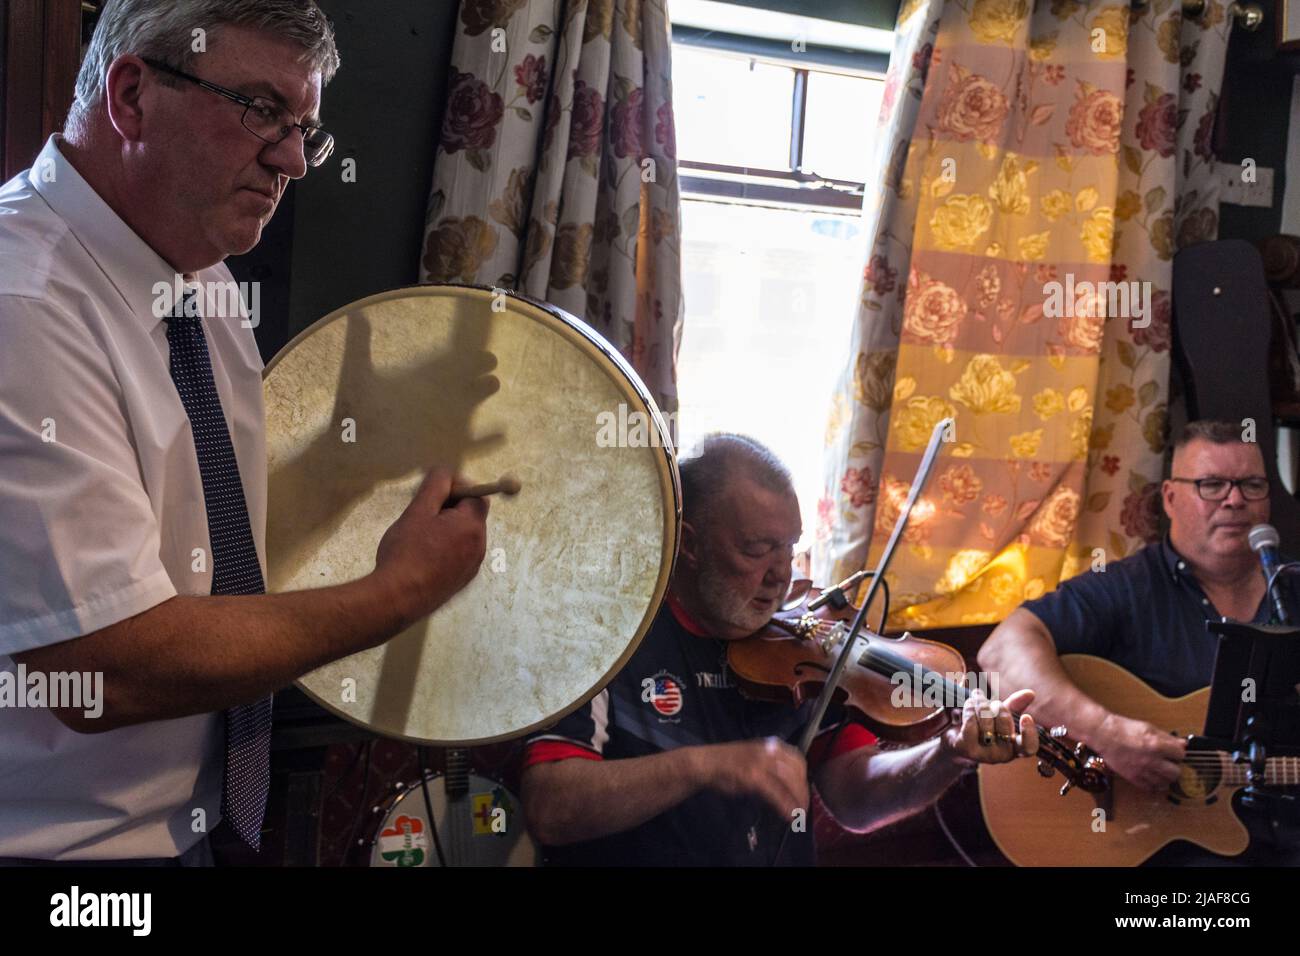 Traditional Irish music in a Donegal bar. A man plays percussion on a bodhran. Stock Photo